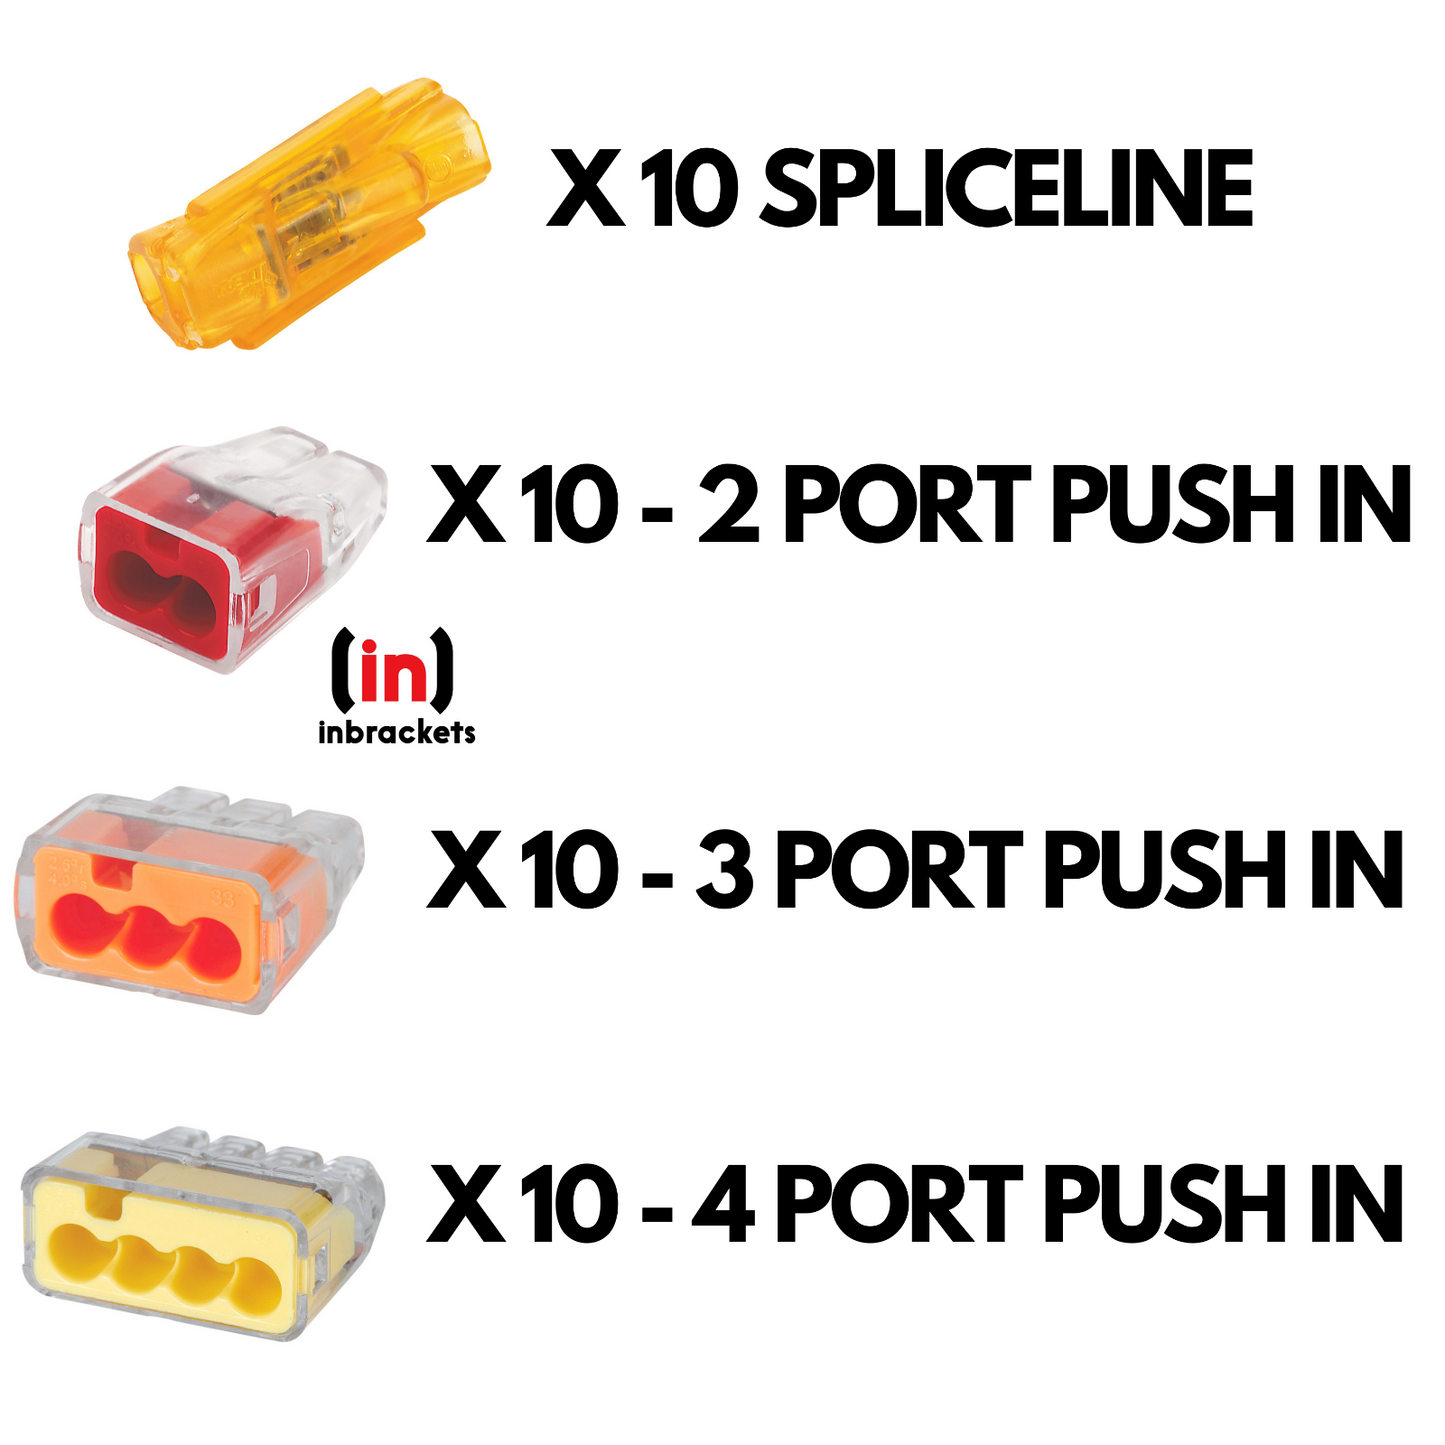 IDEAL PUSH FIT ELECTRICAL WIRE CABLE LEAD CONNECTORs spliceline + 2 3 4 port x40